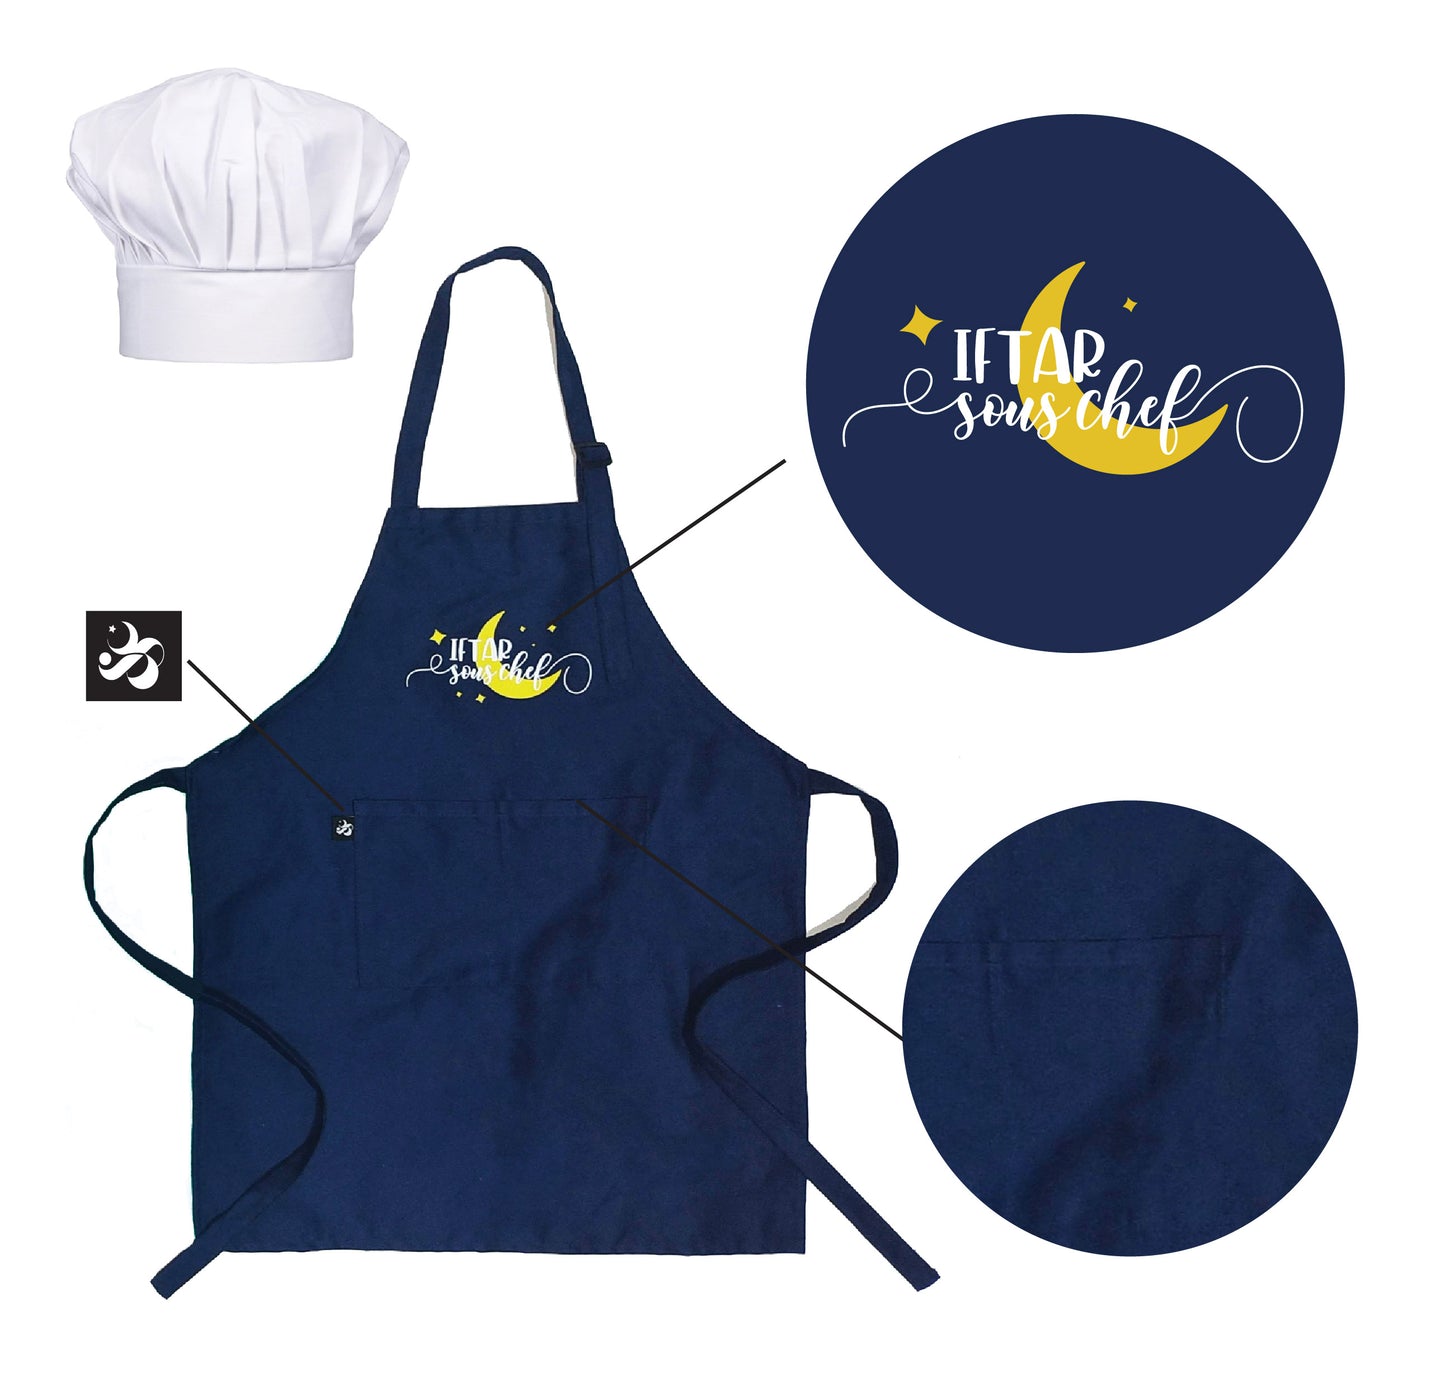 Iftar Sous Chef- Apron and Hat set